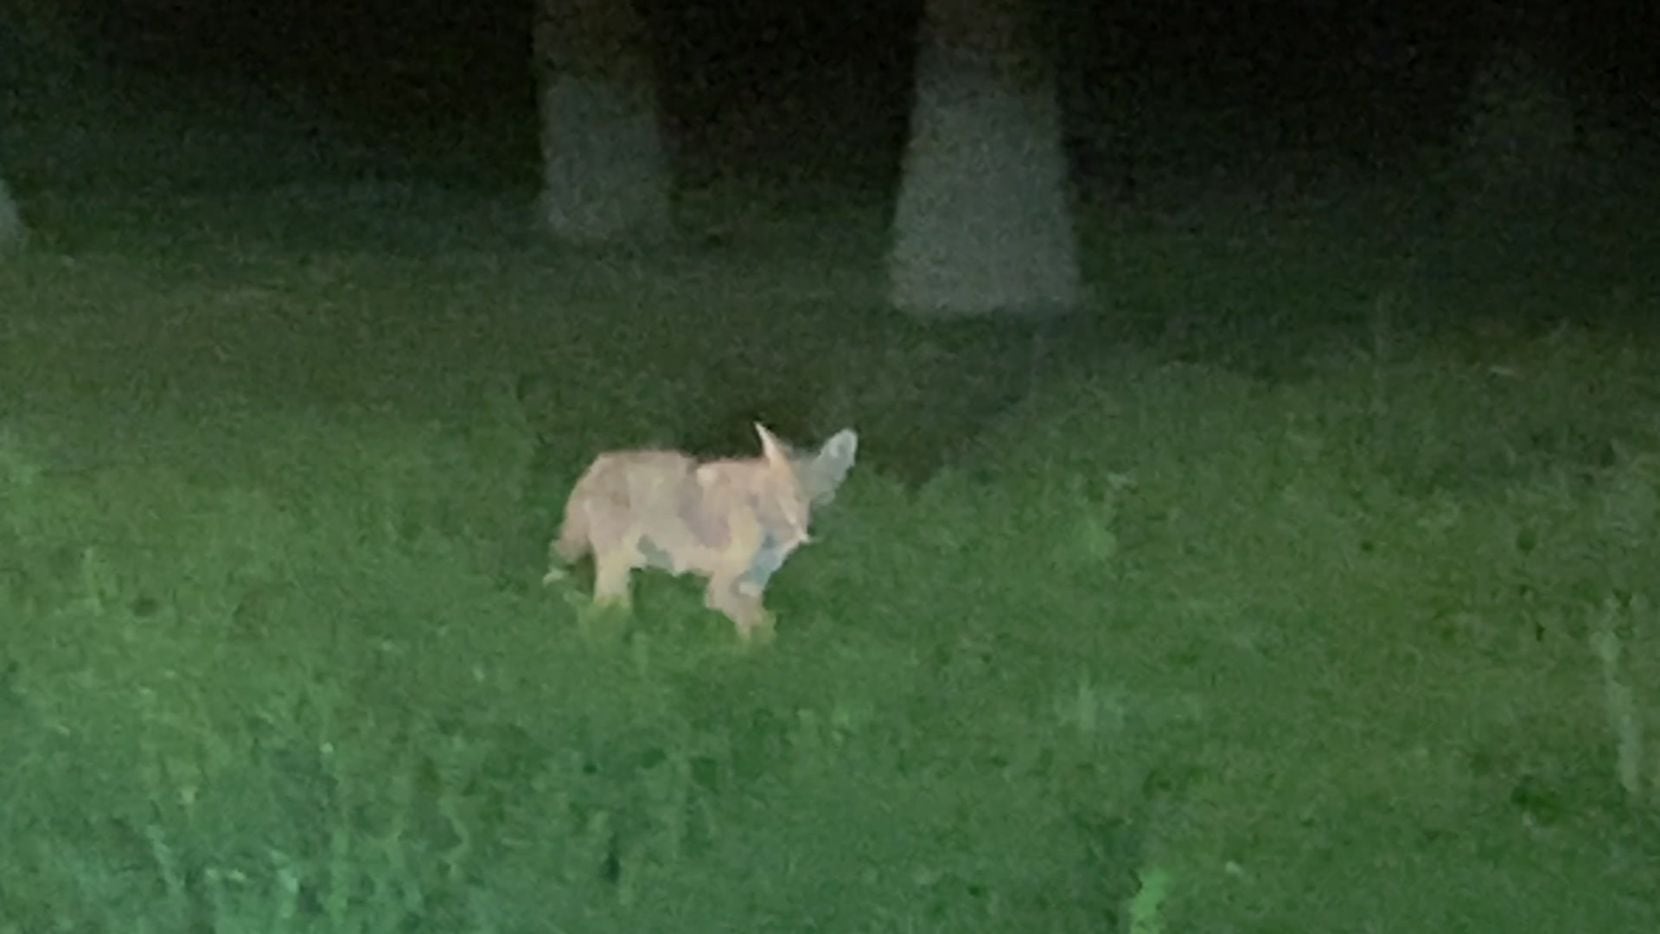 coyote shot dead after kid attacked in Dallas, officials say